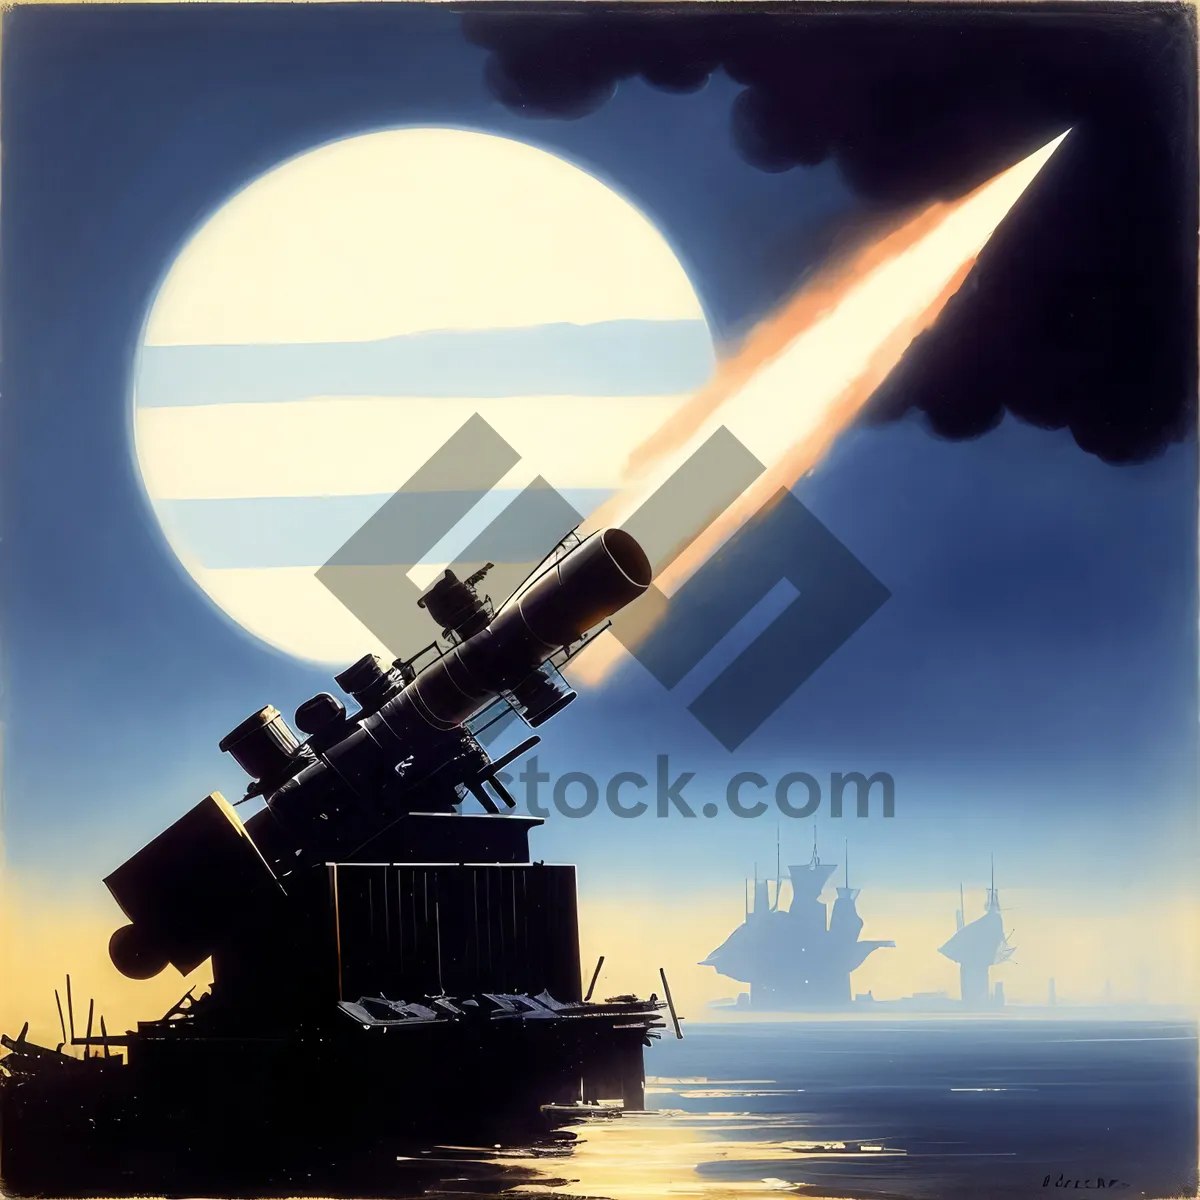 Picture of Powerful Cannon Fires at Sunset Over Water